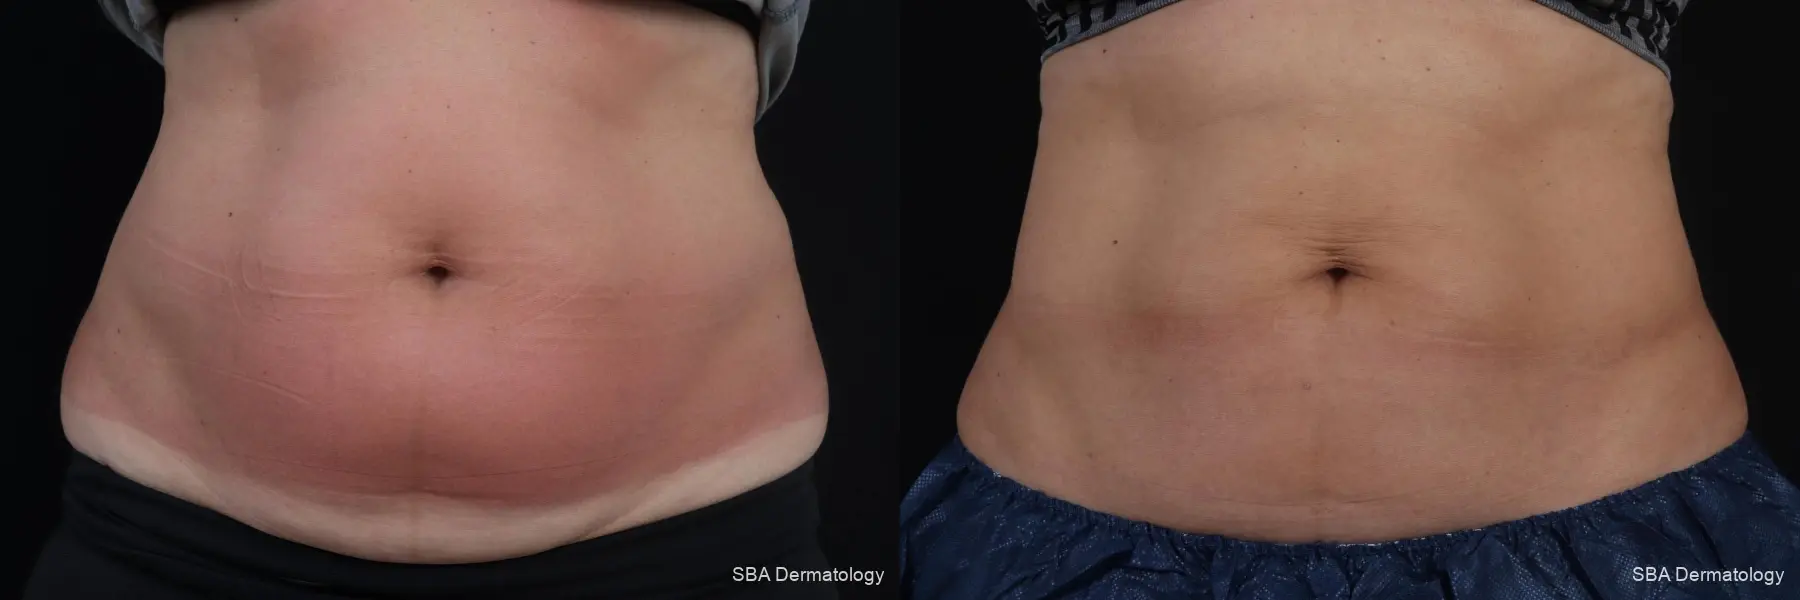 Coolsculpting: Patient 6 - Before and After 1